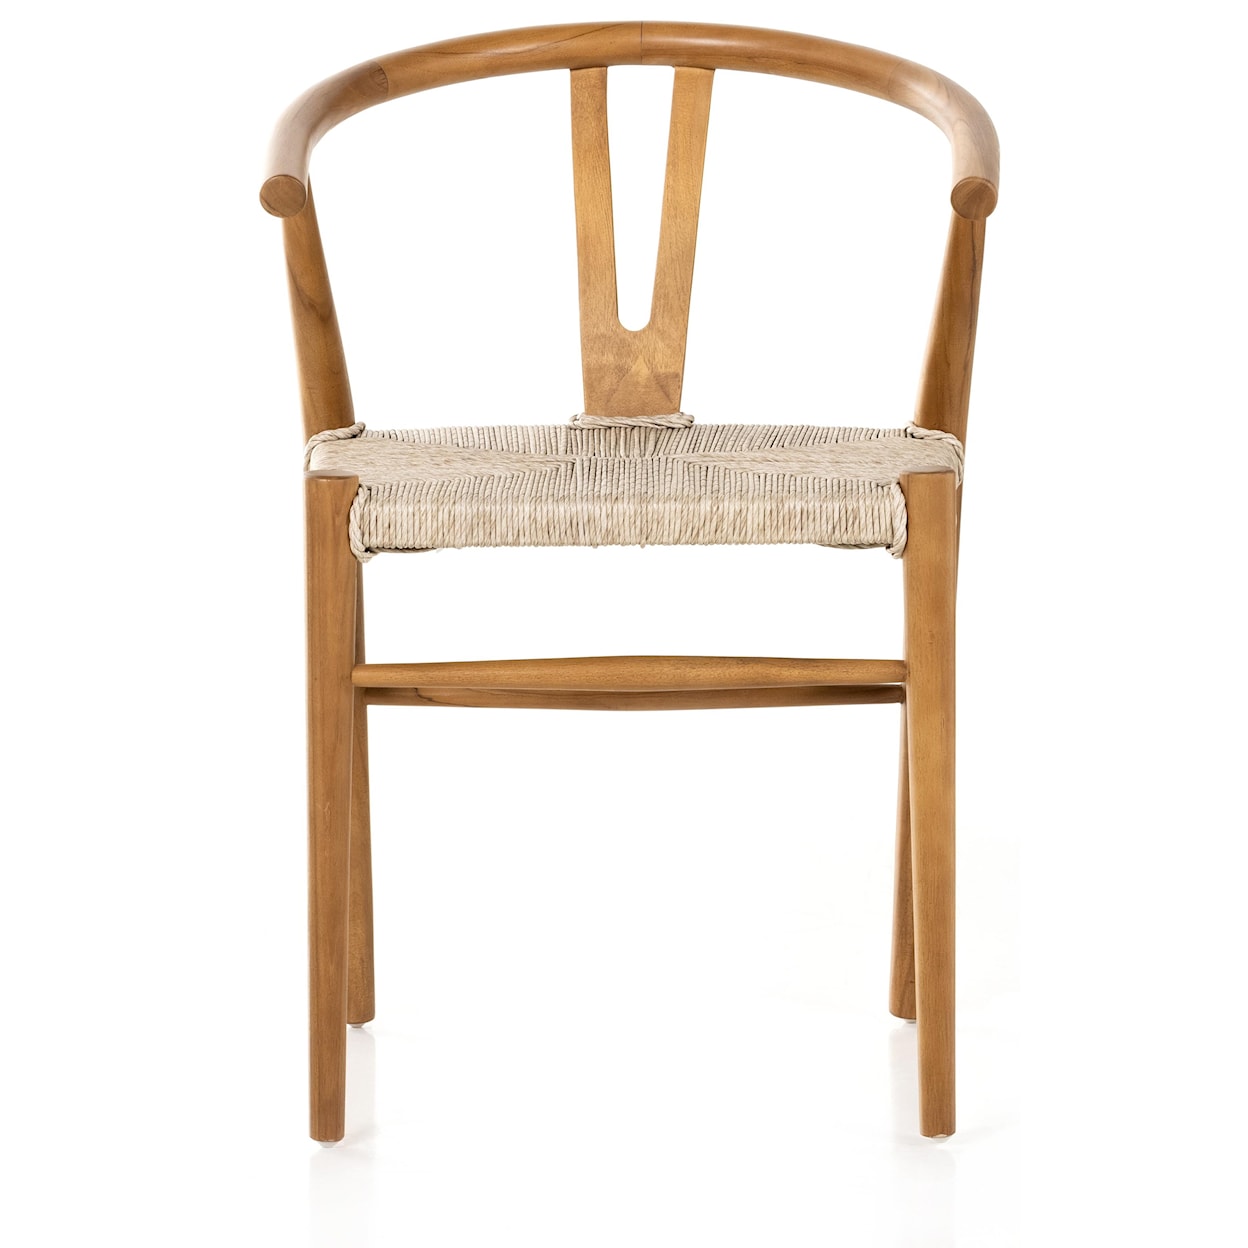 Four Hands Grass Roots Muestra Dining Chair